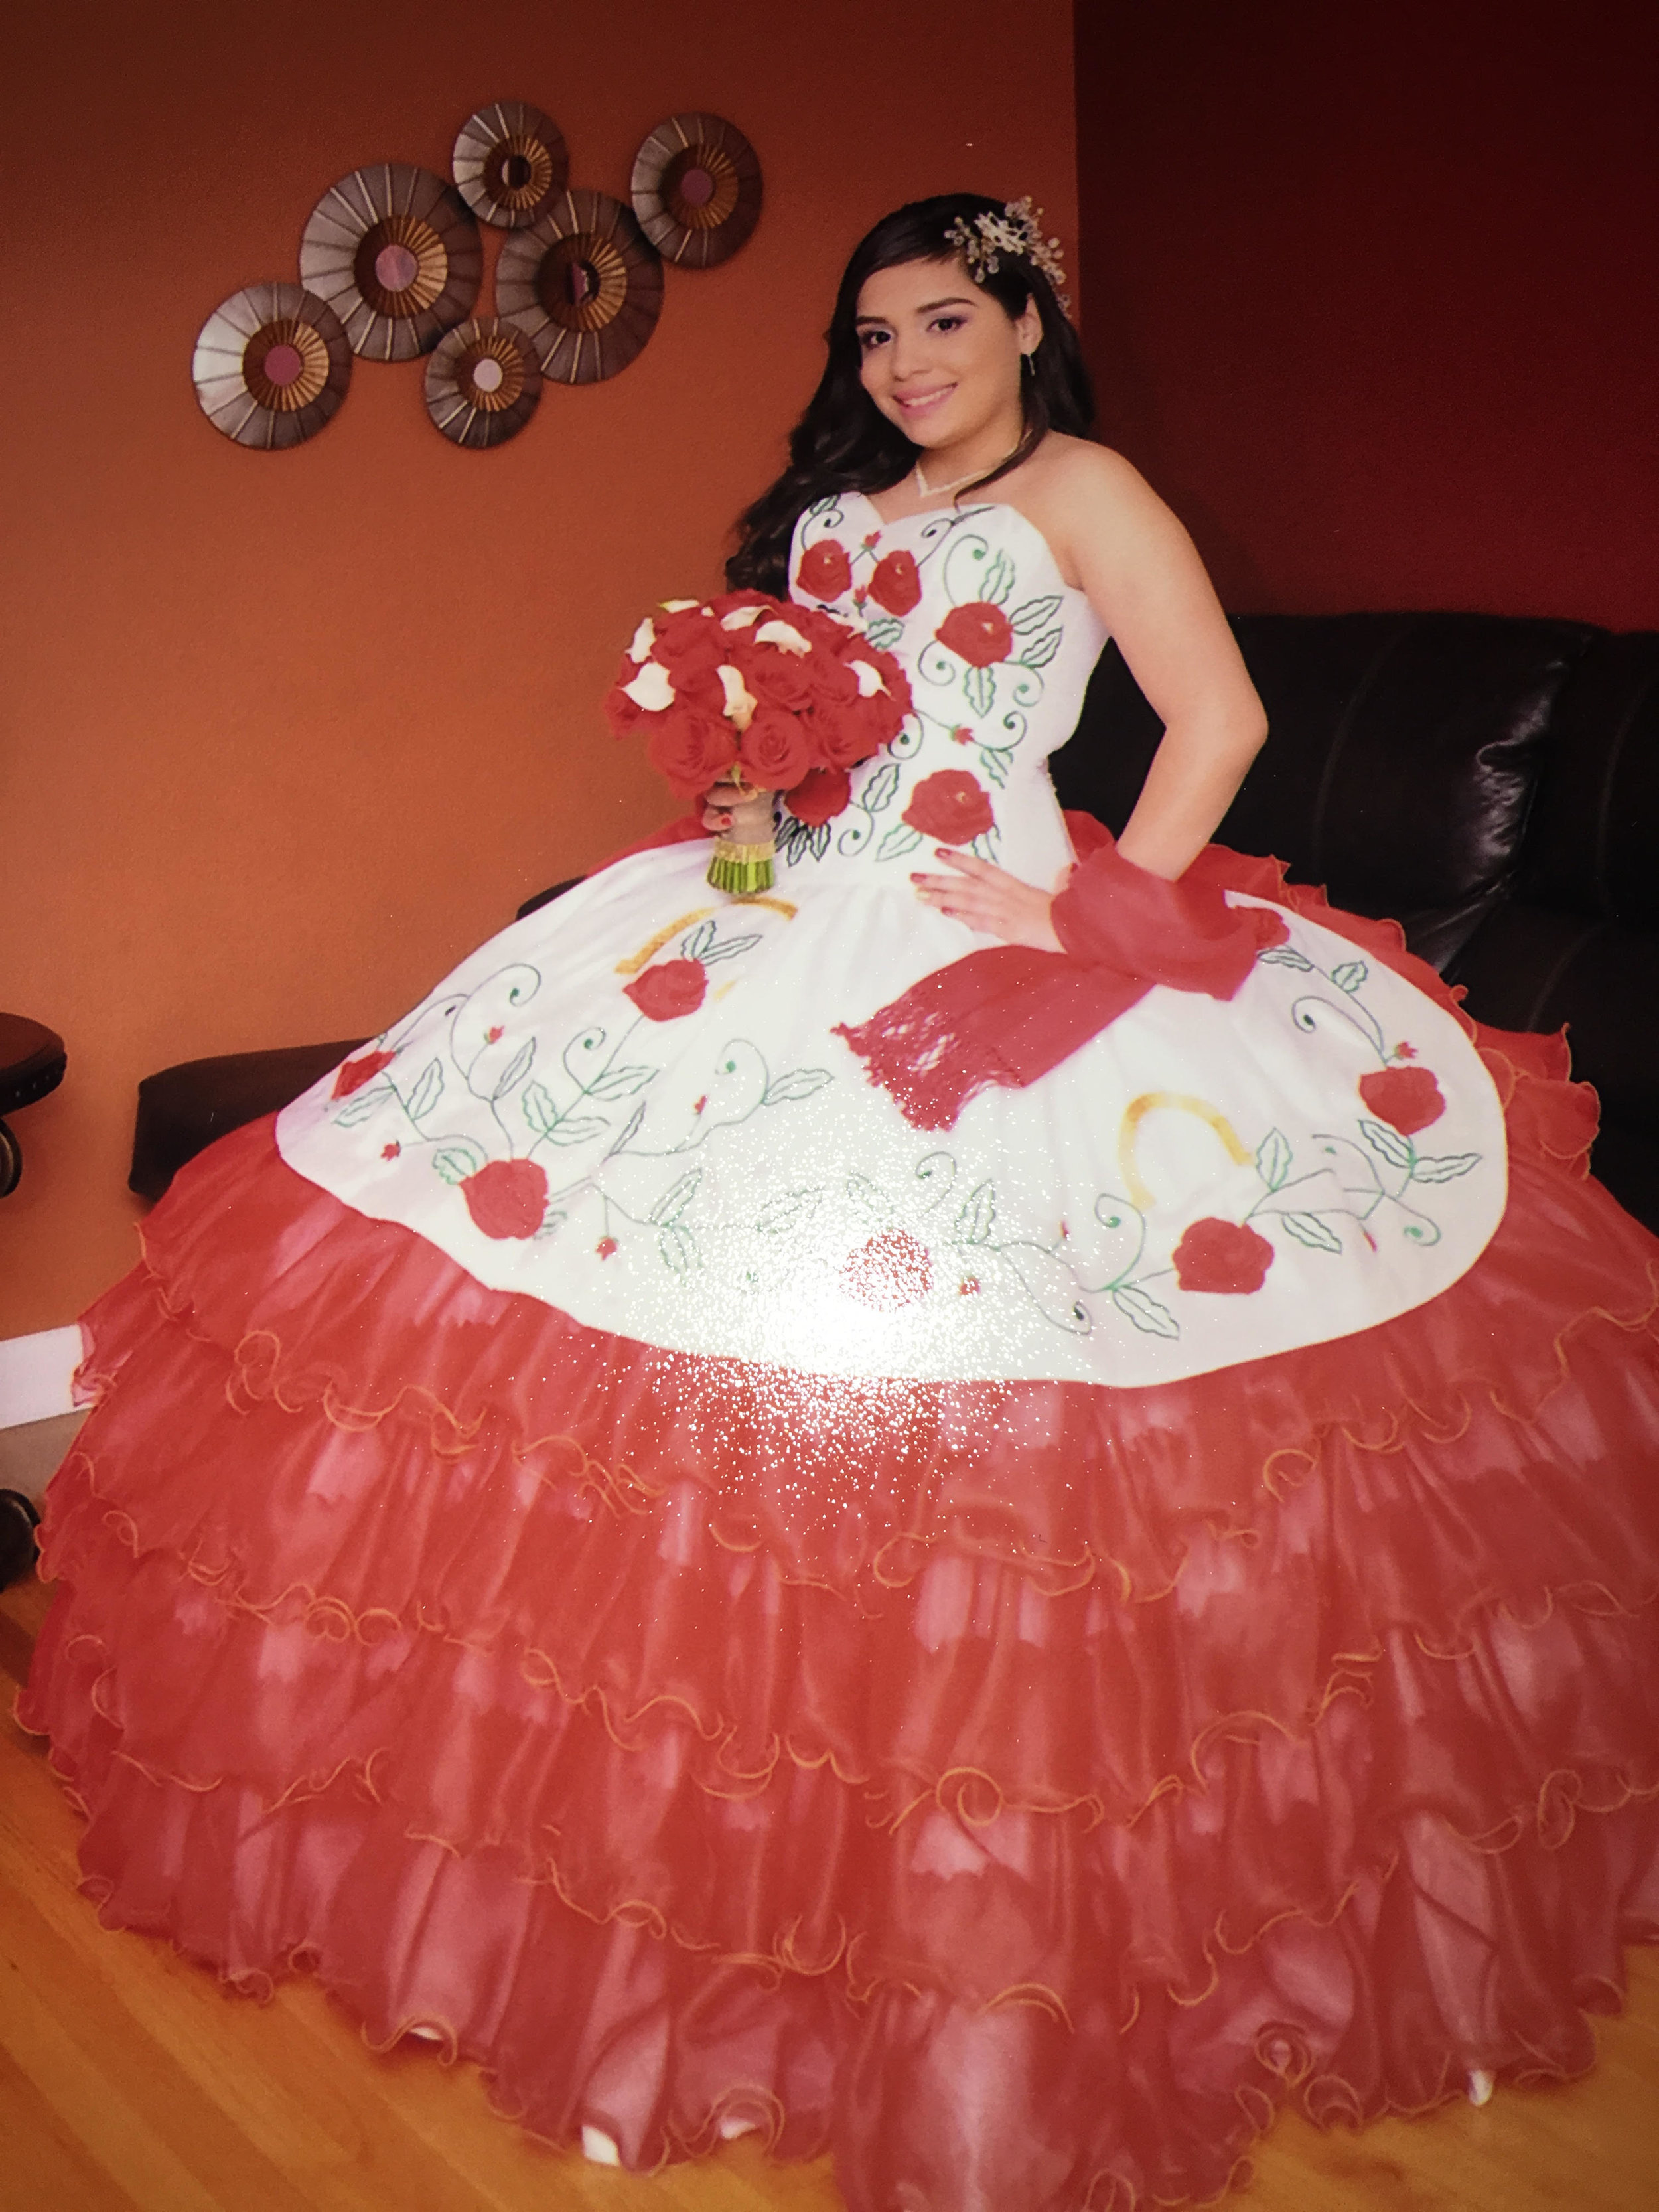 Quinceaneras: A Celebration of Womenhood by Ileana and Kassandra — St. Francis de Sales High School